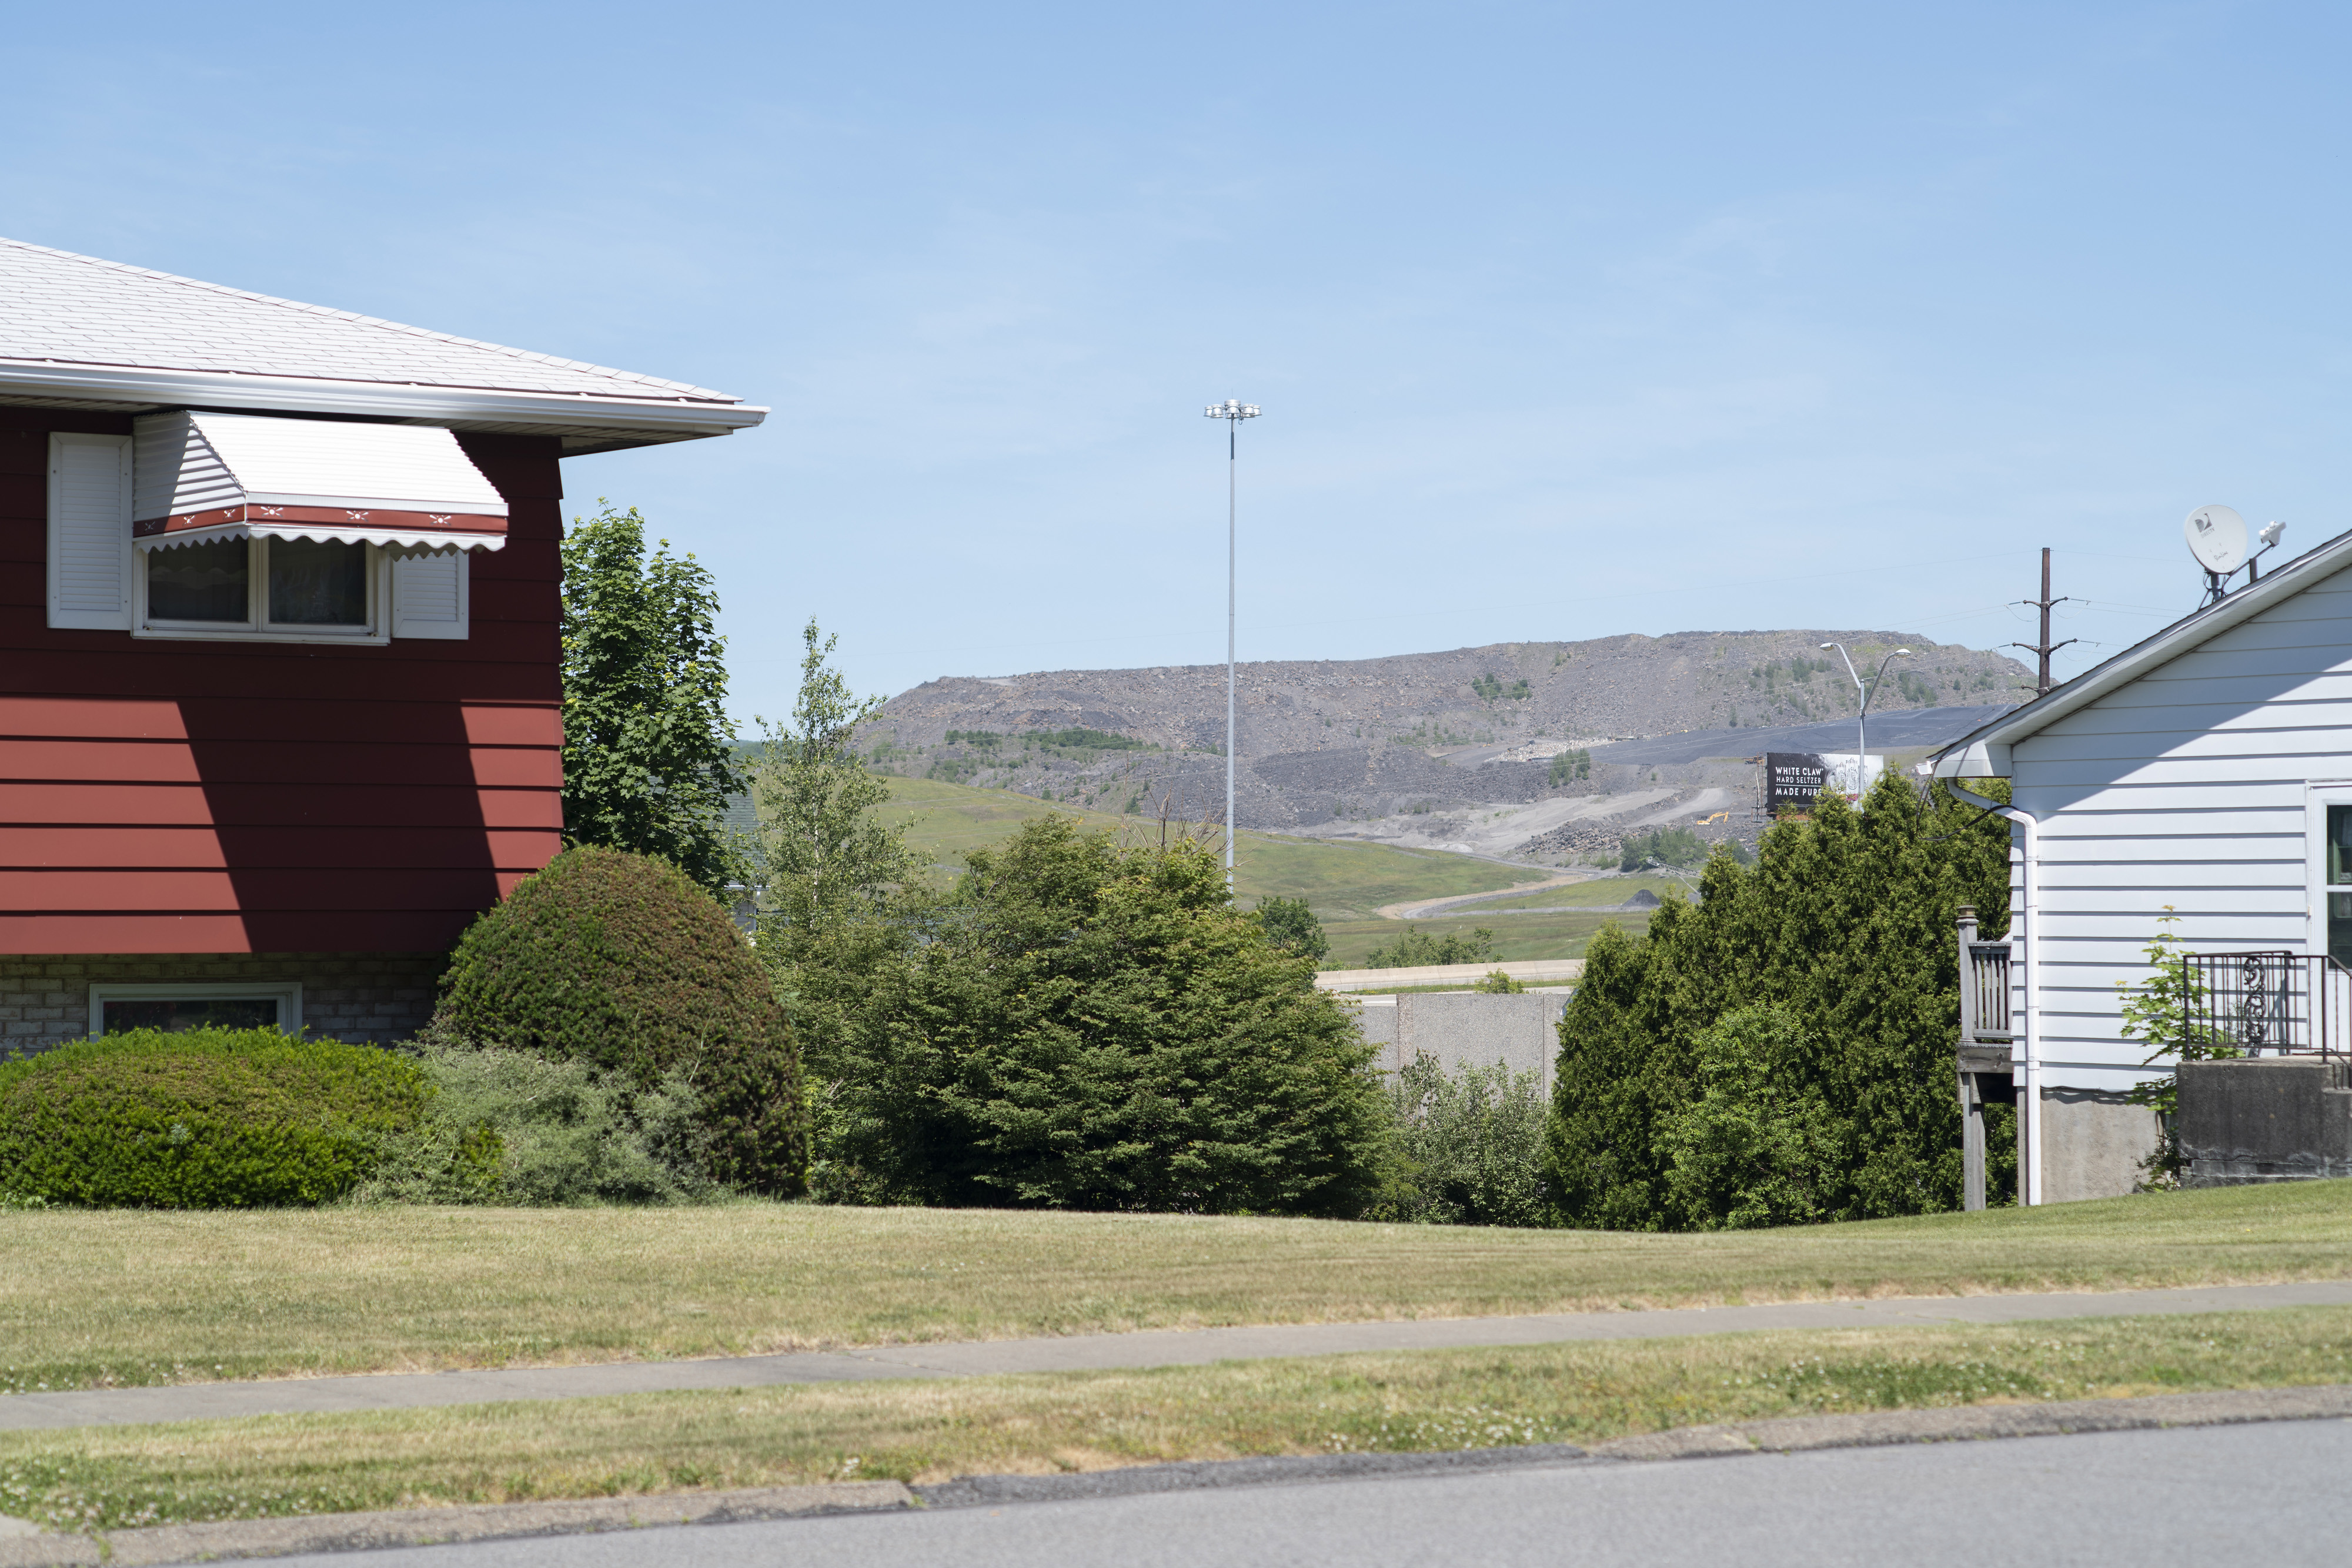 USA, Pennsylvania, June 17, 2020. A view of the Keystone Sanitary Landfill (in the background) from a residential street